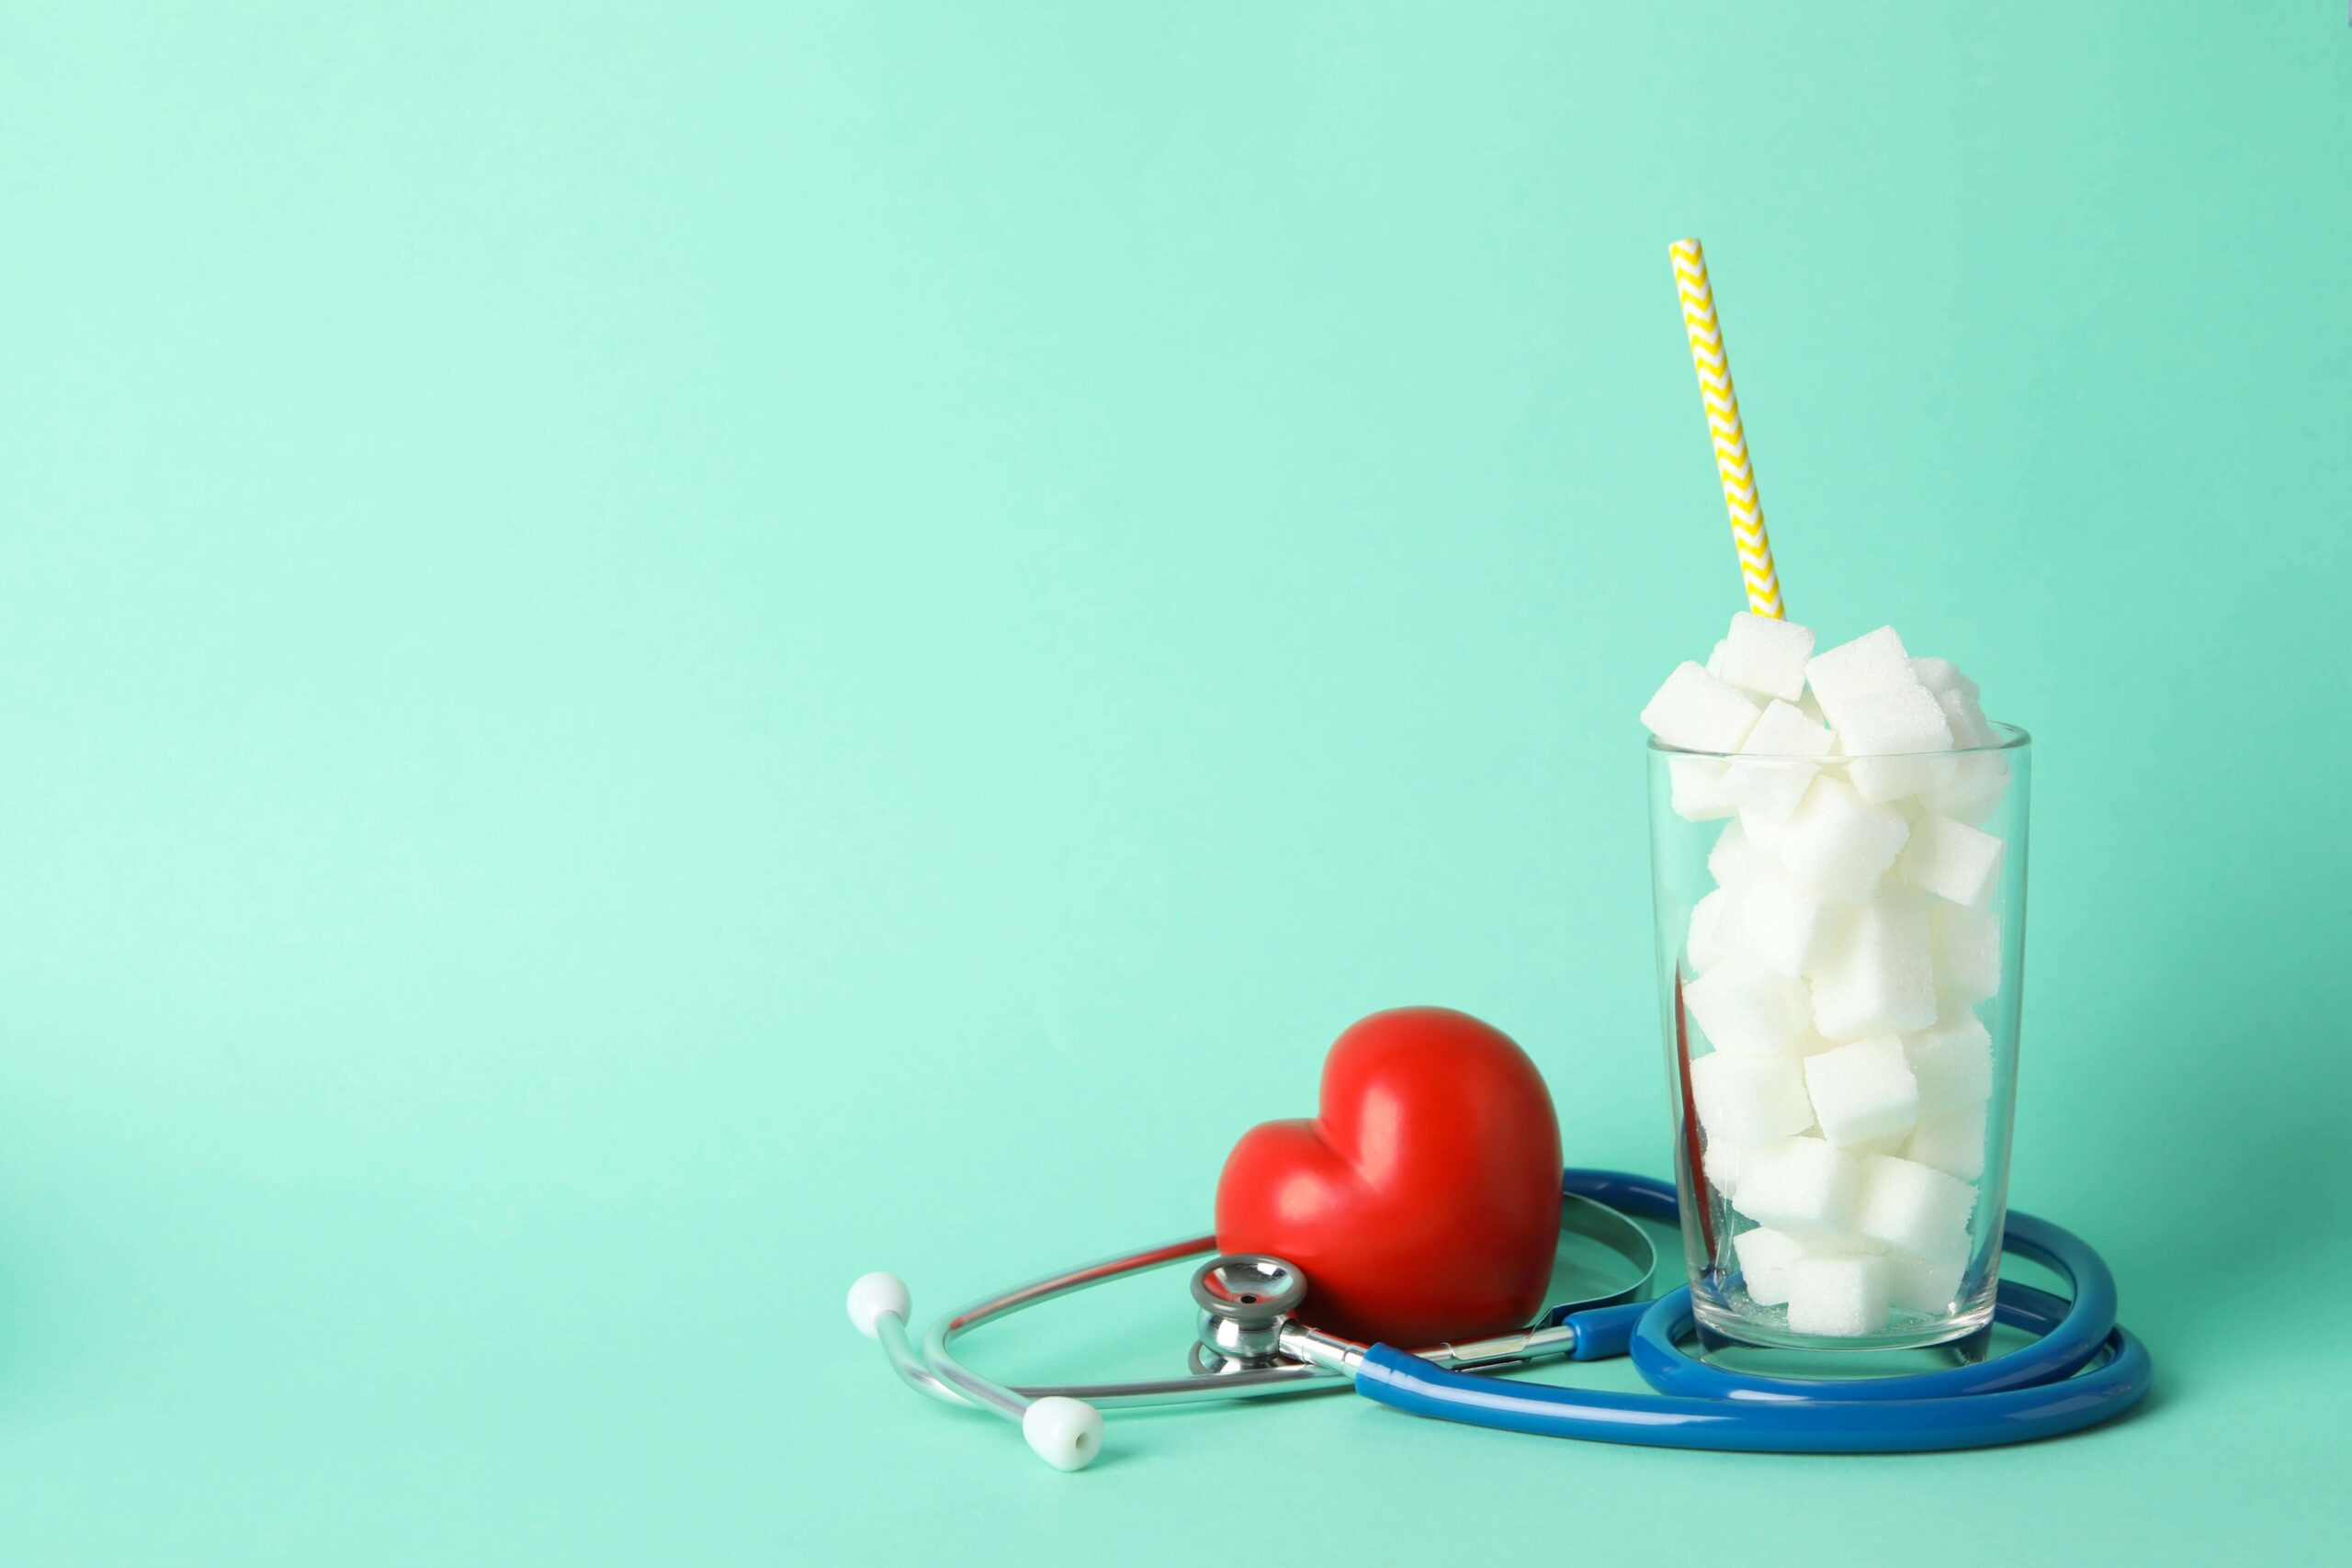 How John Reversed Calcium Score by 59% in 16 Months